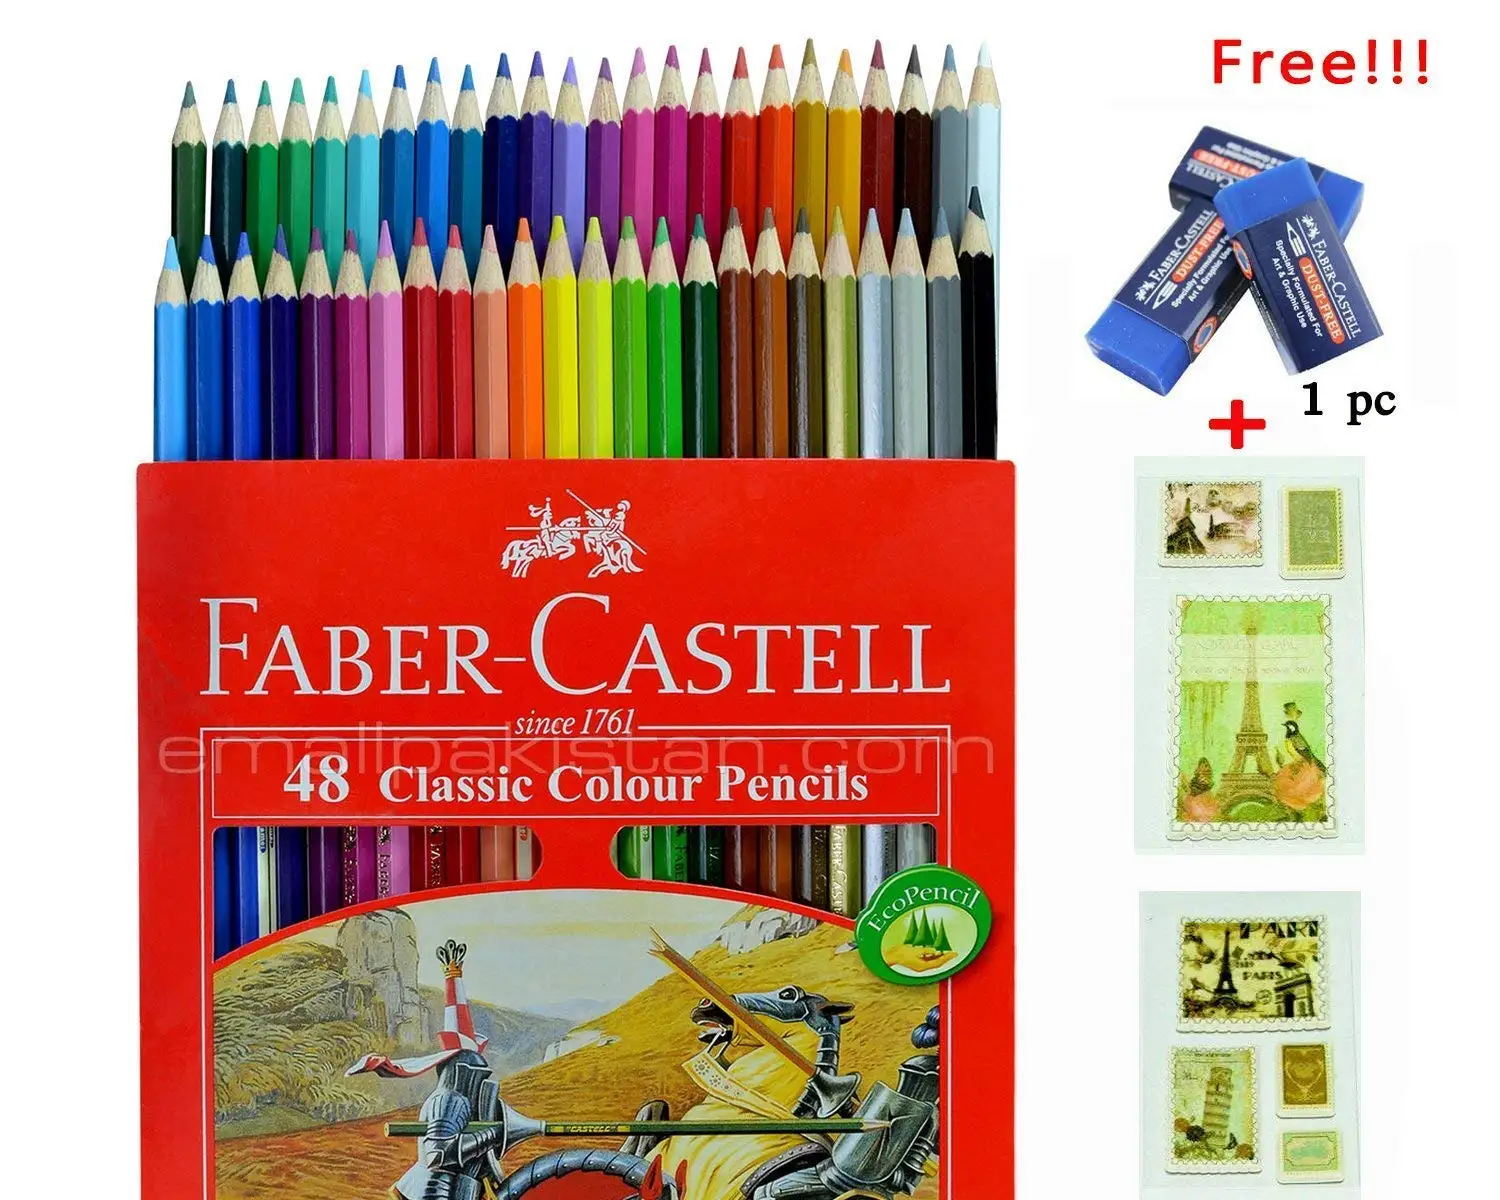 2b pencil faber castell